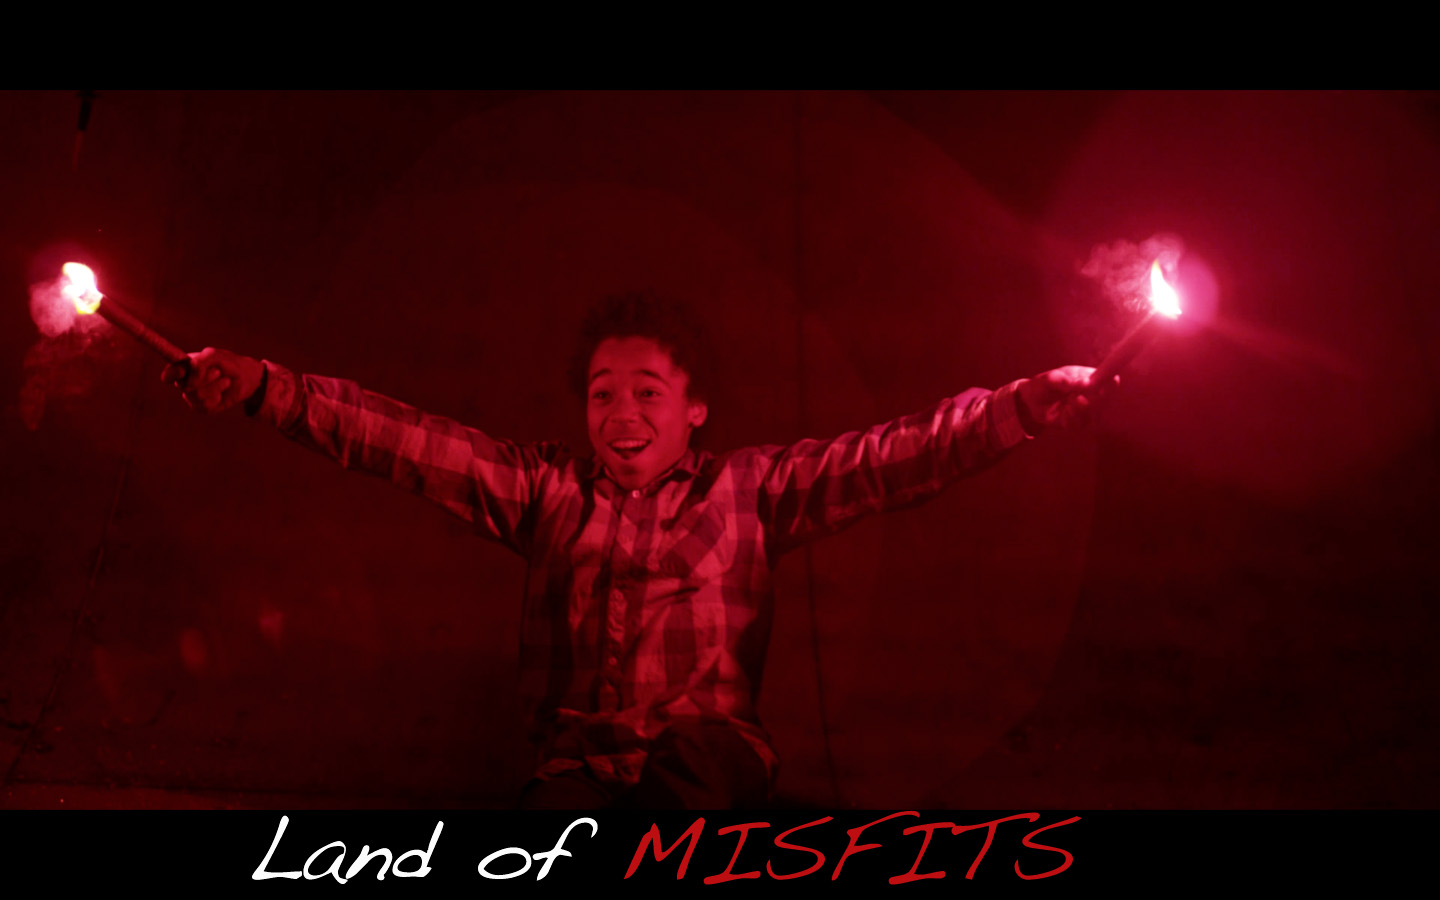 Phillip Cates as Junior in Land of Misfits, Directed by Steven Caple, Jr.